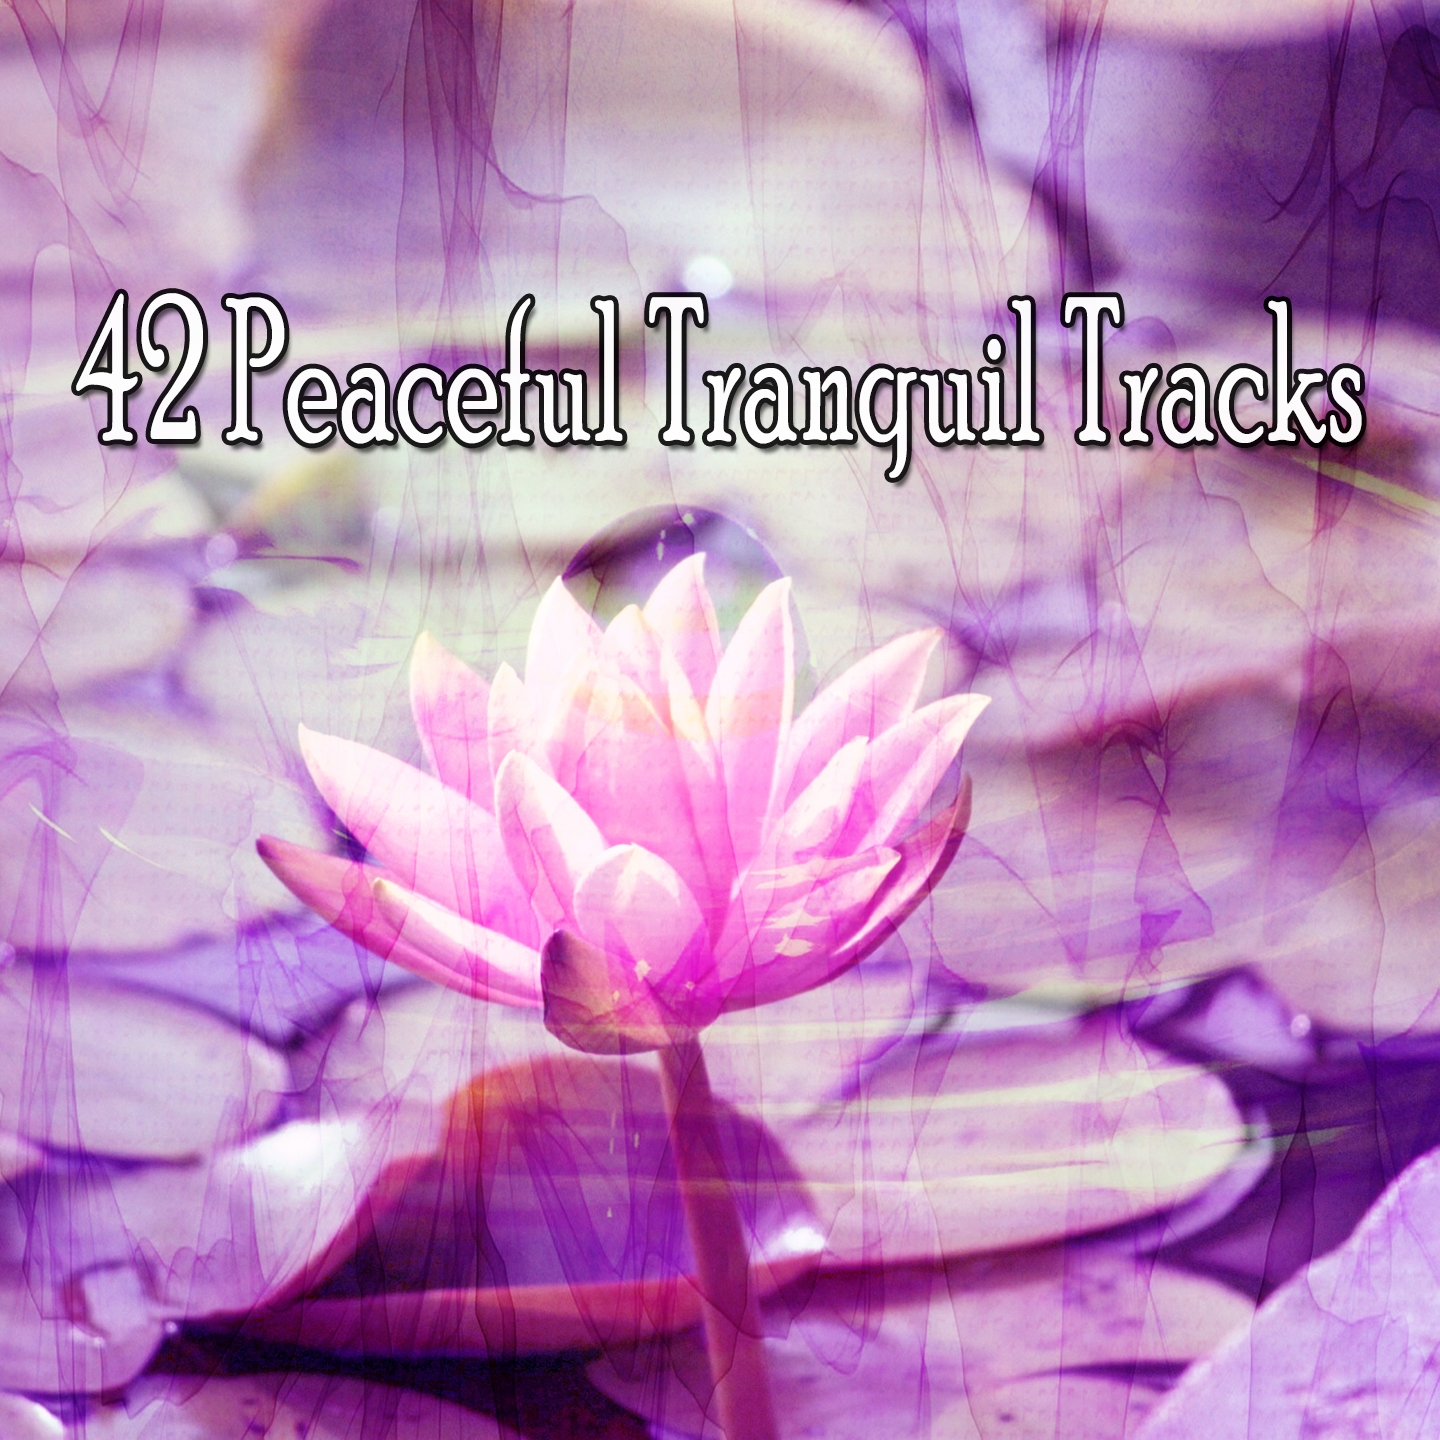 42 Peaceful Tranquil Tracks